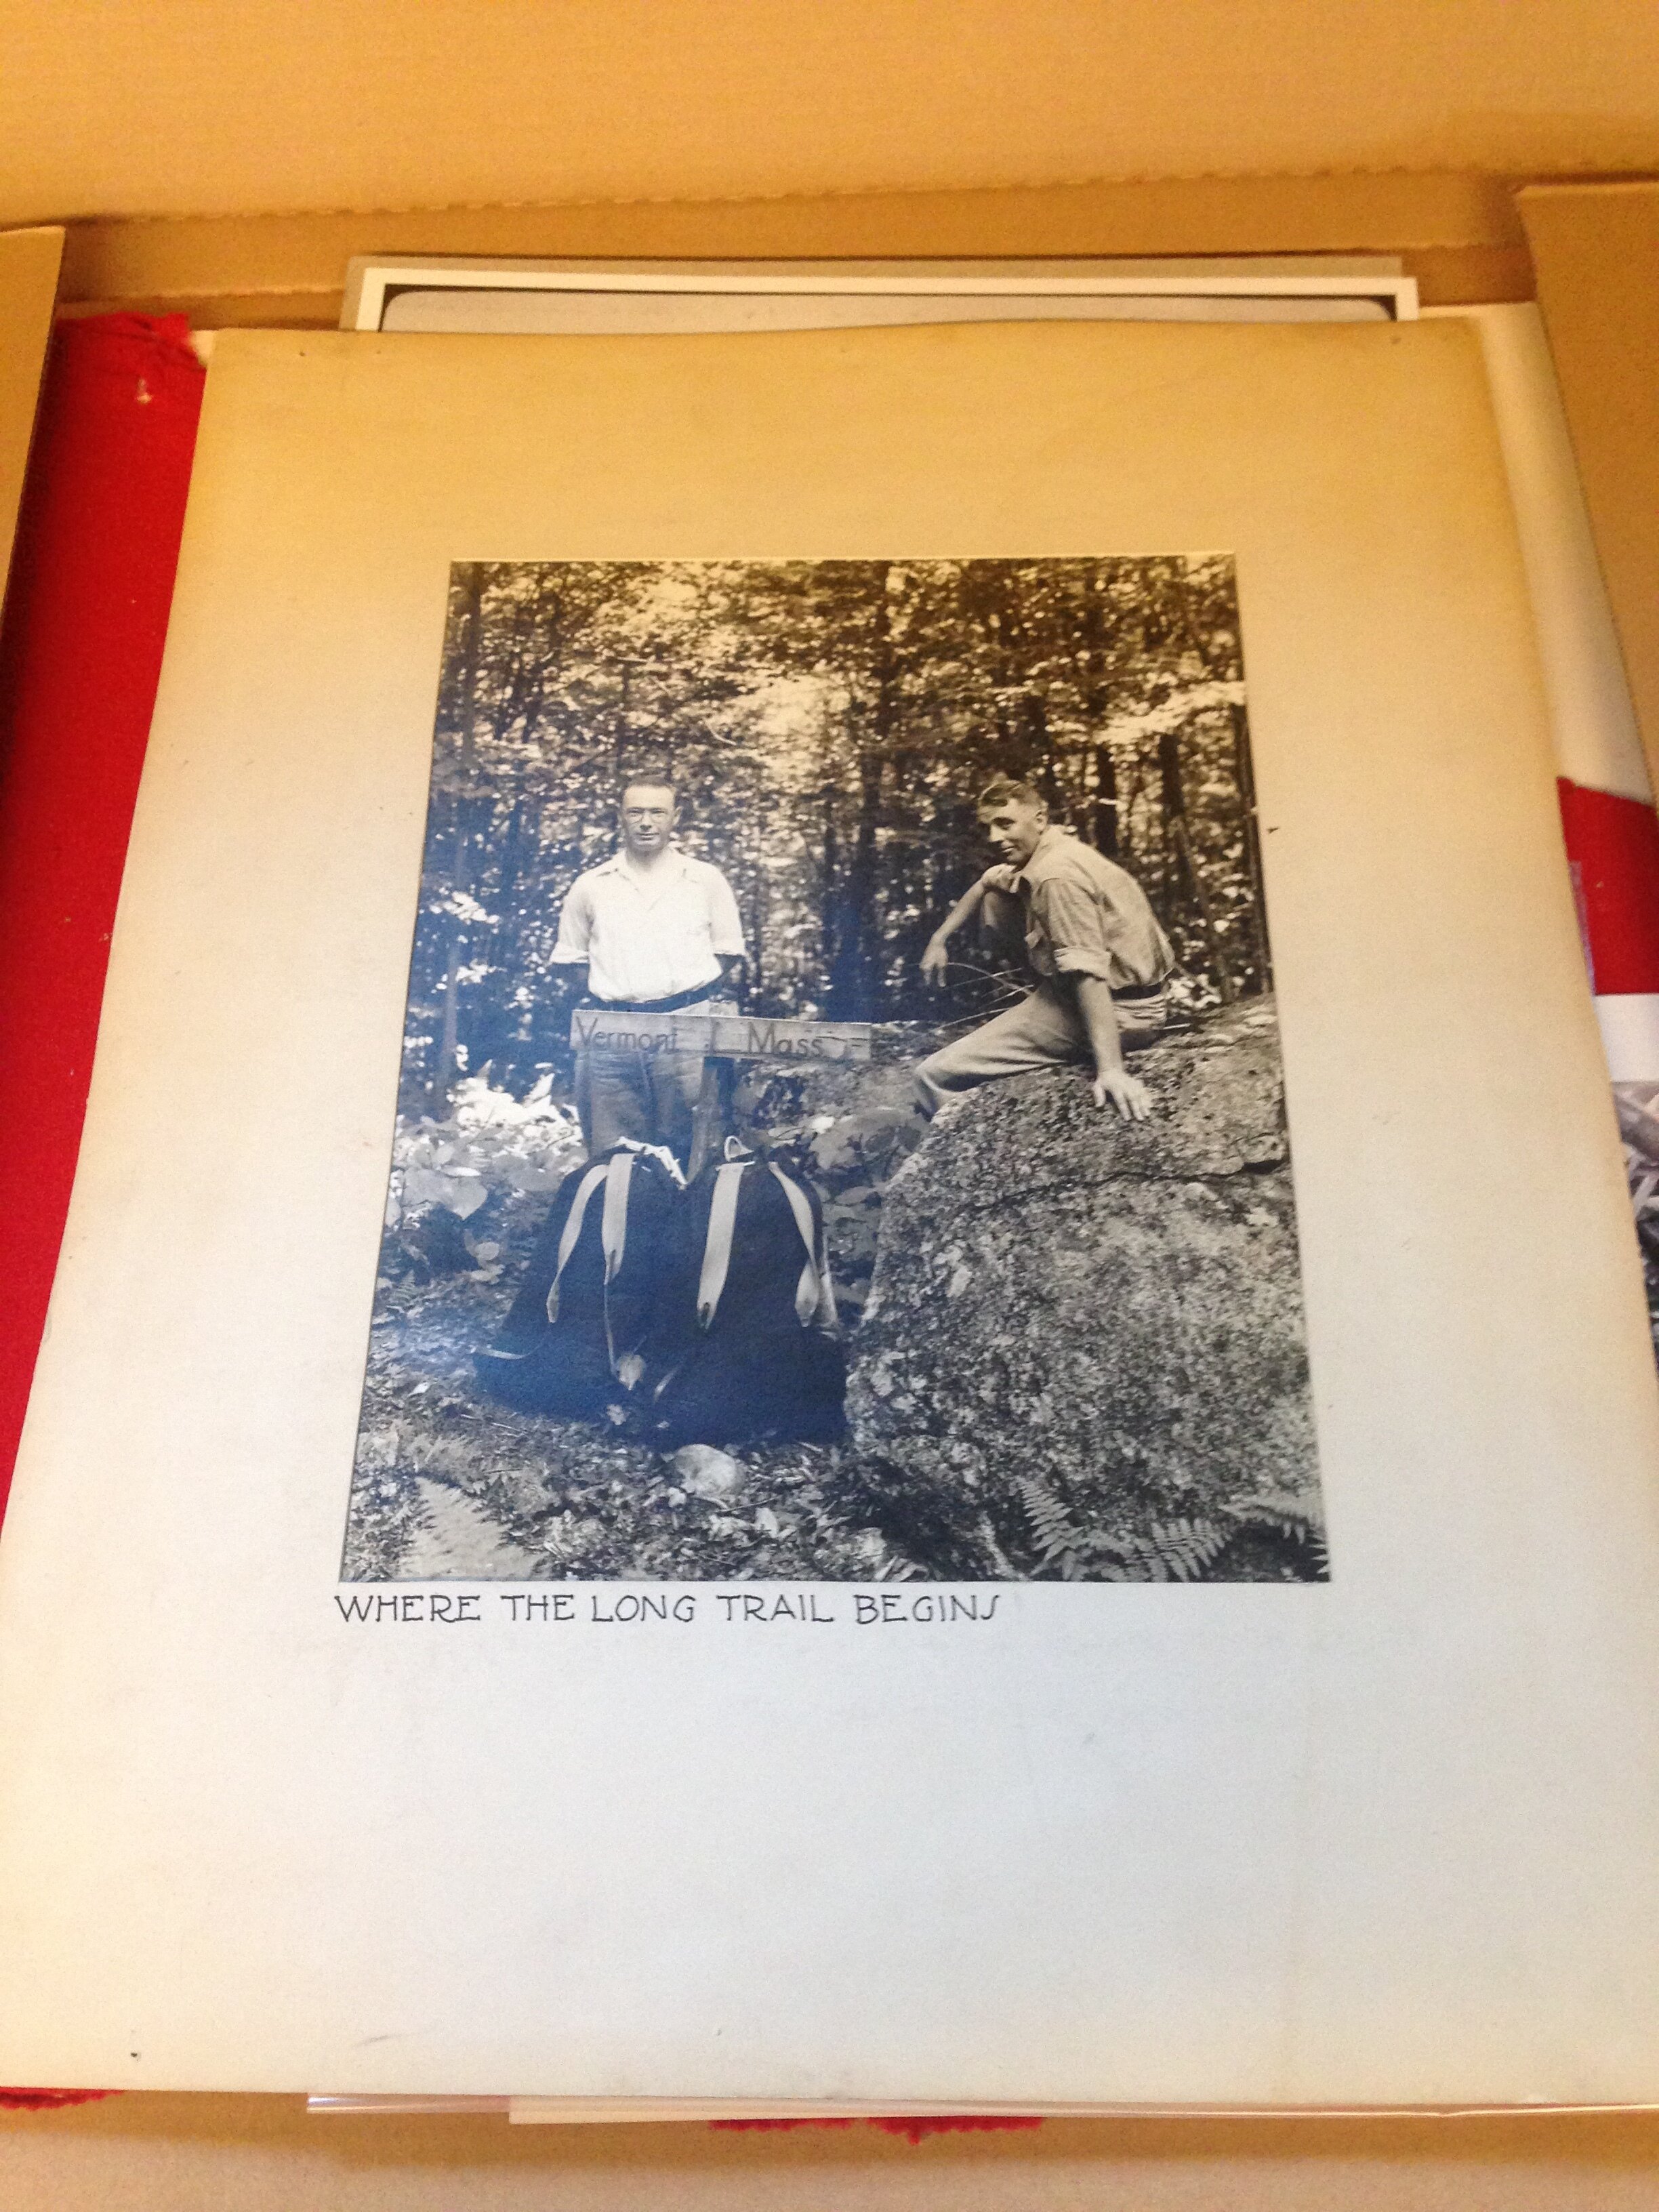   Photographic print of two hikers at the southern terminus of the Long Trail. The caption reads “Where The Long Trail Begins” (Green Mountain Club Archives).  